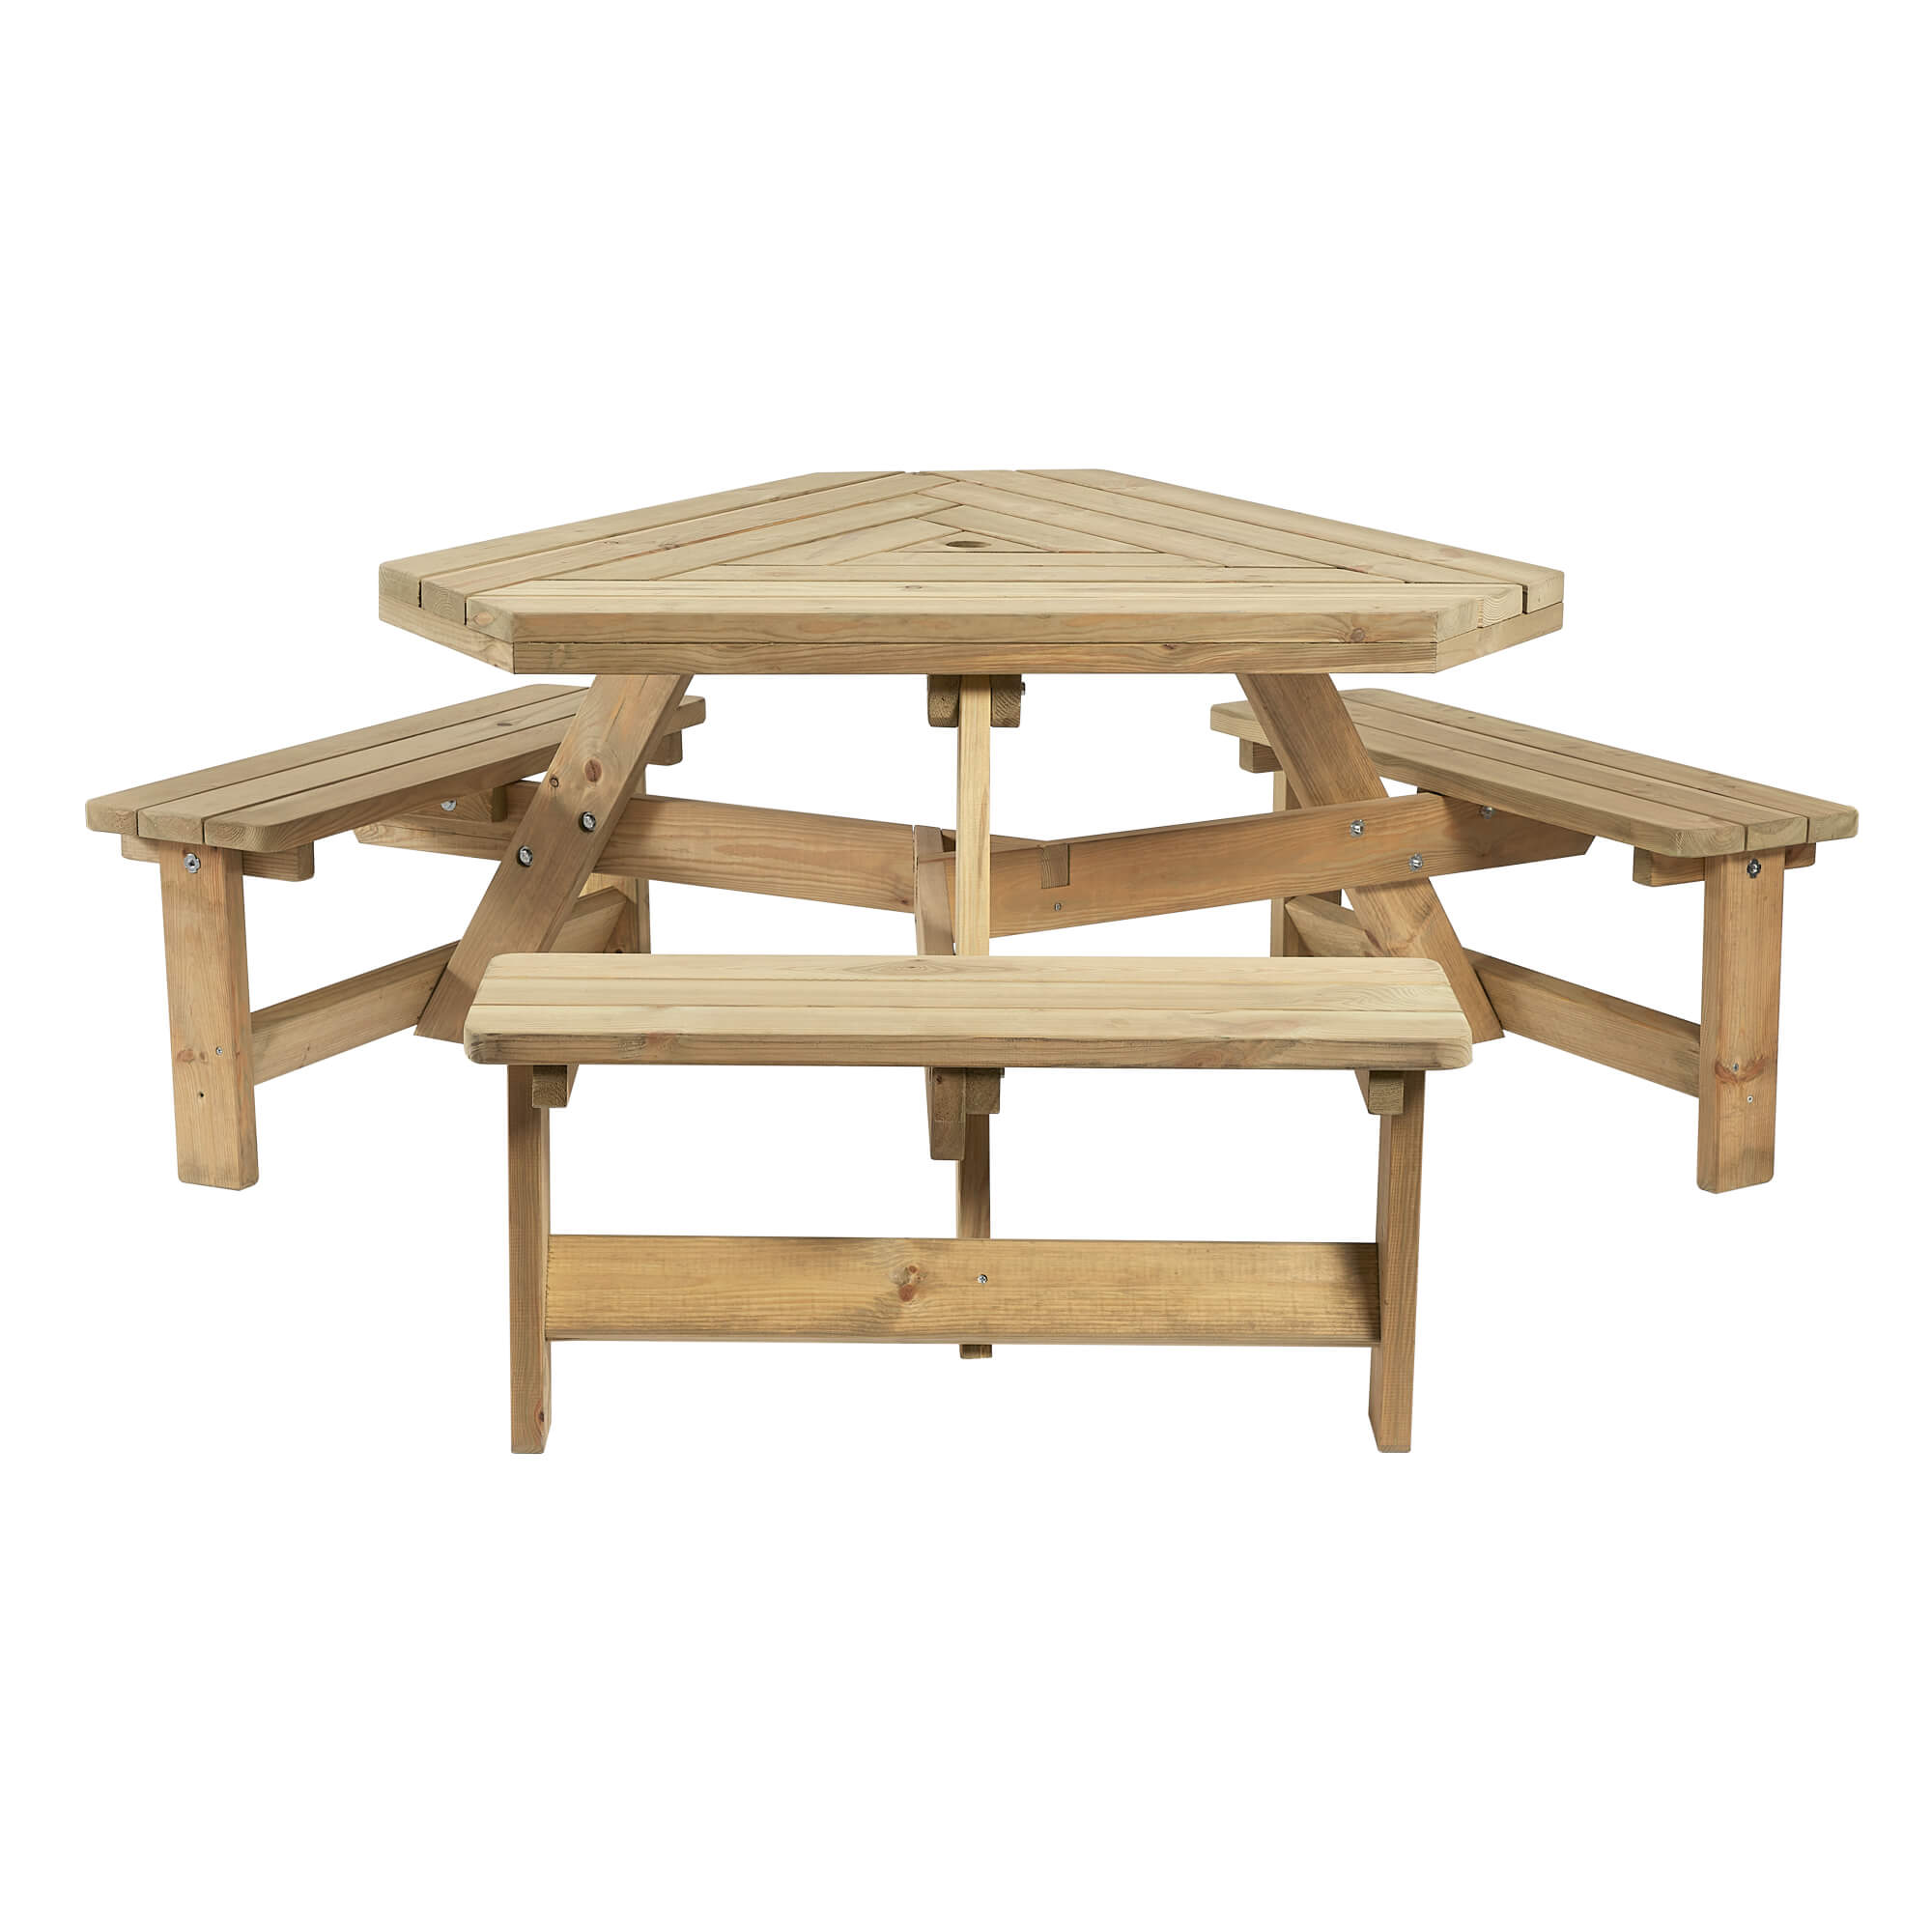 Winer Diner Triangle Picnic Table-Furniture People-Contract Furniture Store